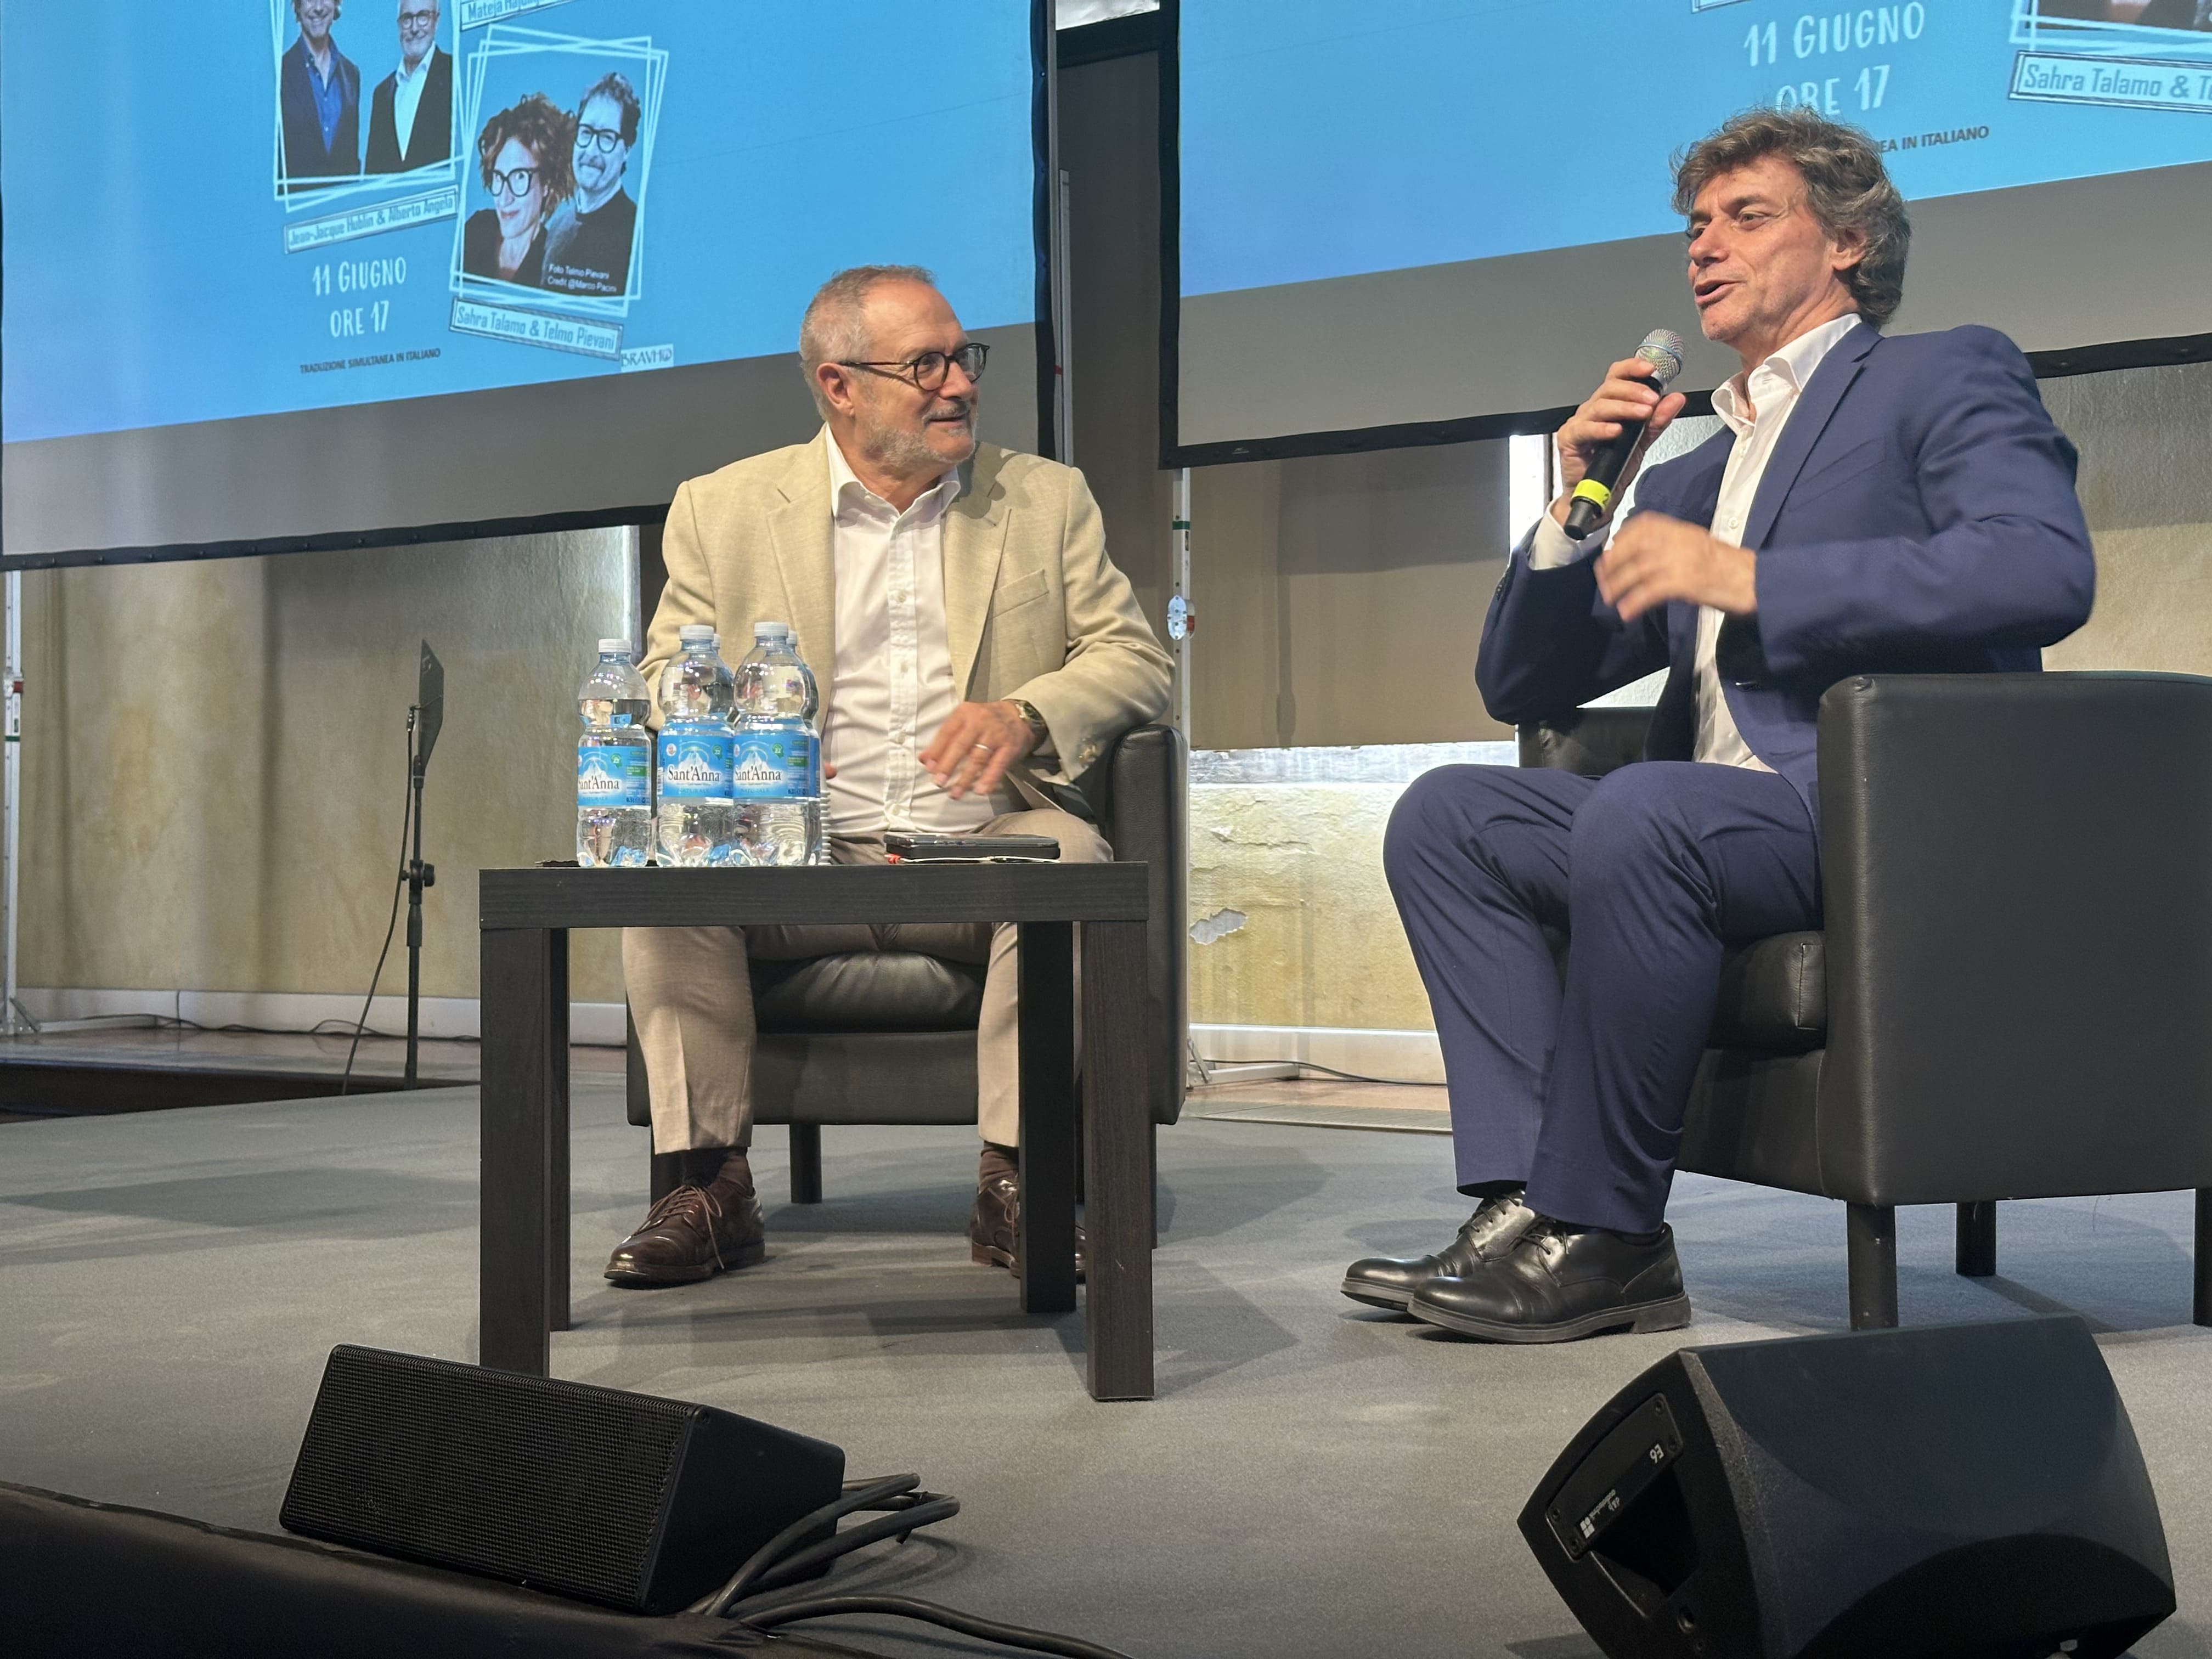 Discussion between Jean-Jacques Hublin and Alberto Angela